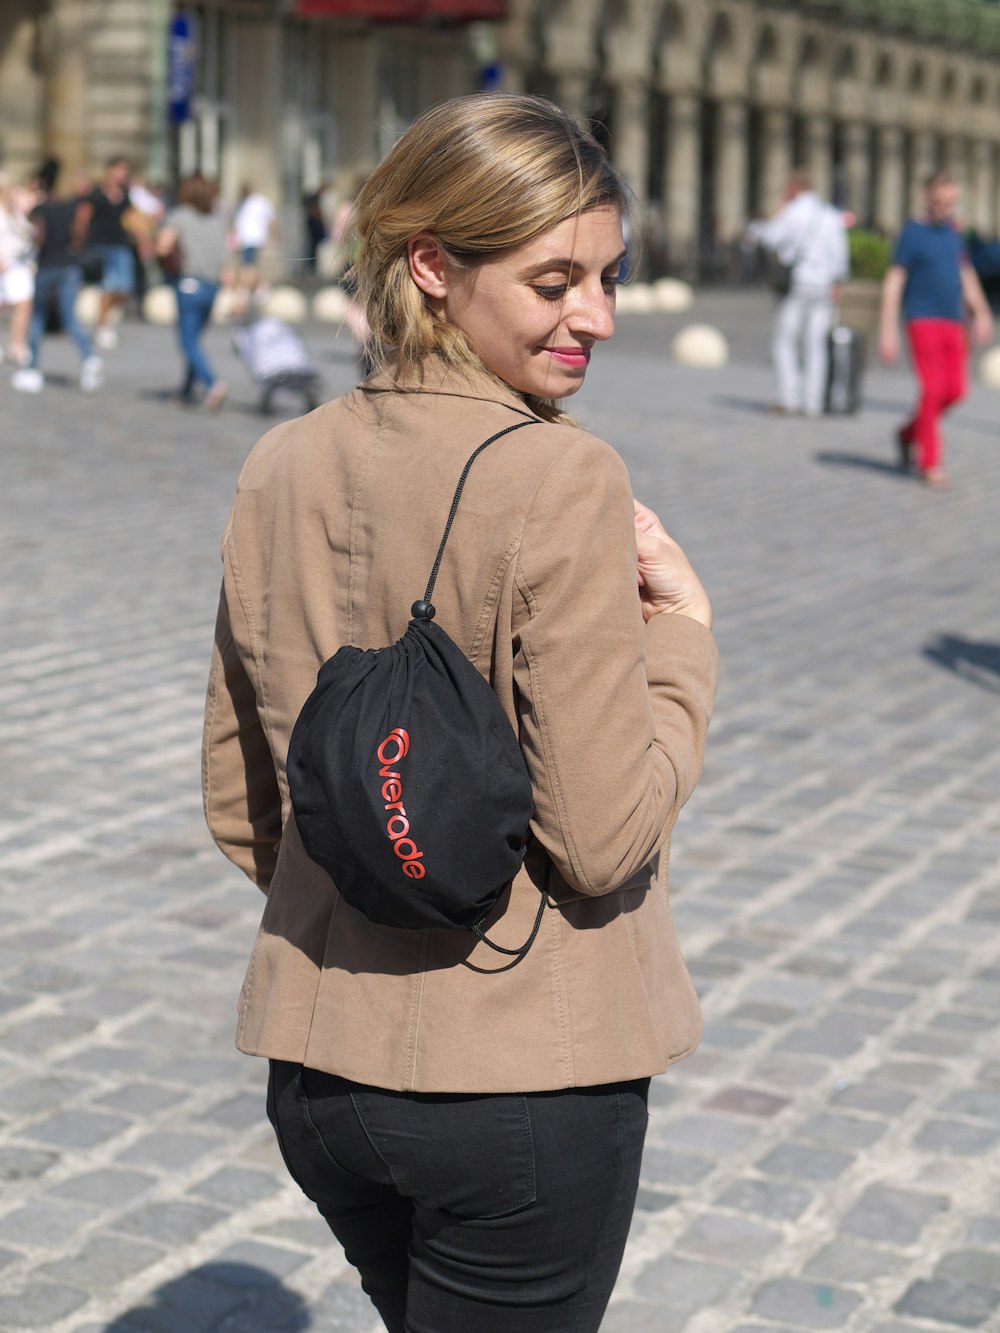 a woman walking down a street with a backpack on her back